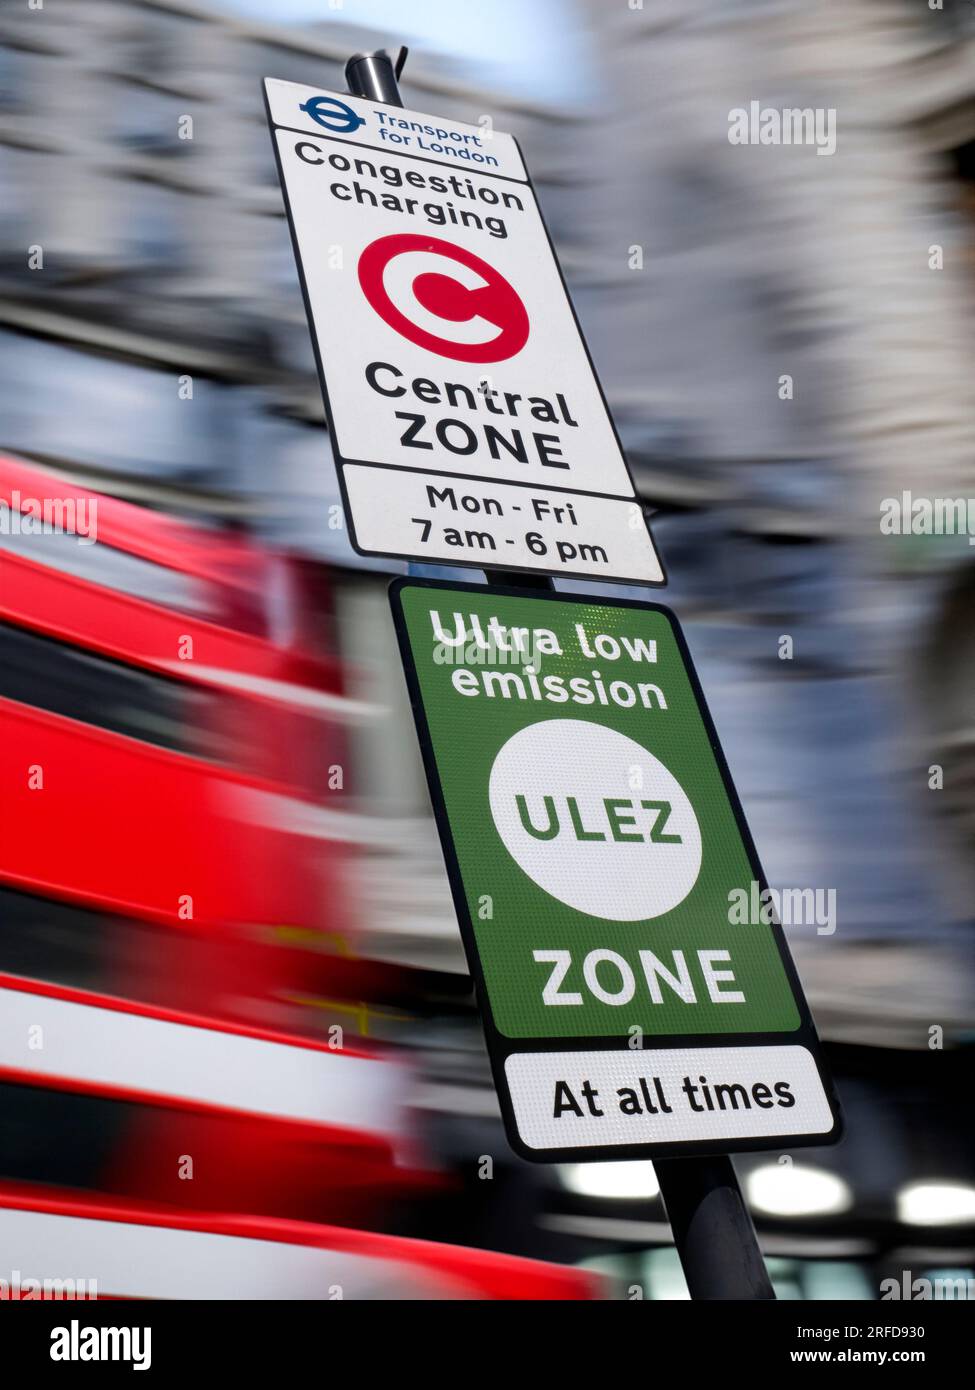 ULEZ' ZONE SIGN CONGESTION SIGNAGE TFL  London area city town background Congestion/Emission charging London zone sign with 'ULEZ' ultra low emission zone sign against blurred traffic and city buildings London UK Stock Photo